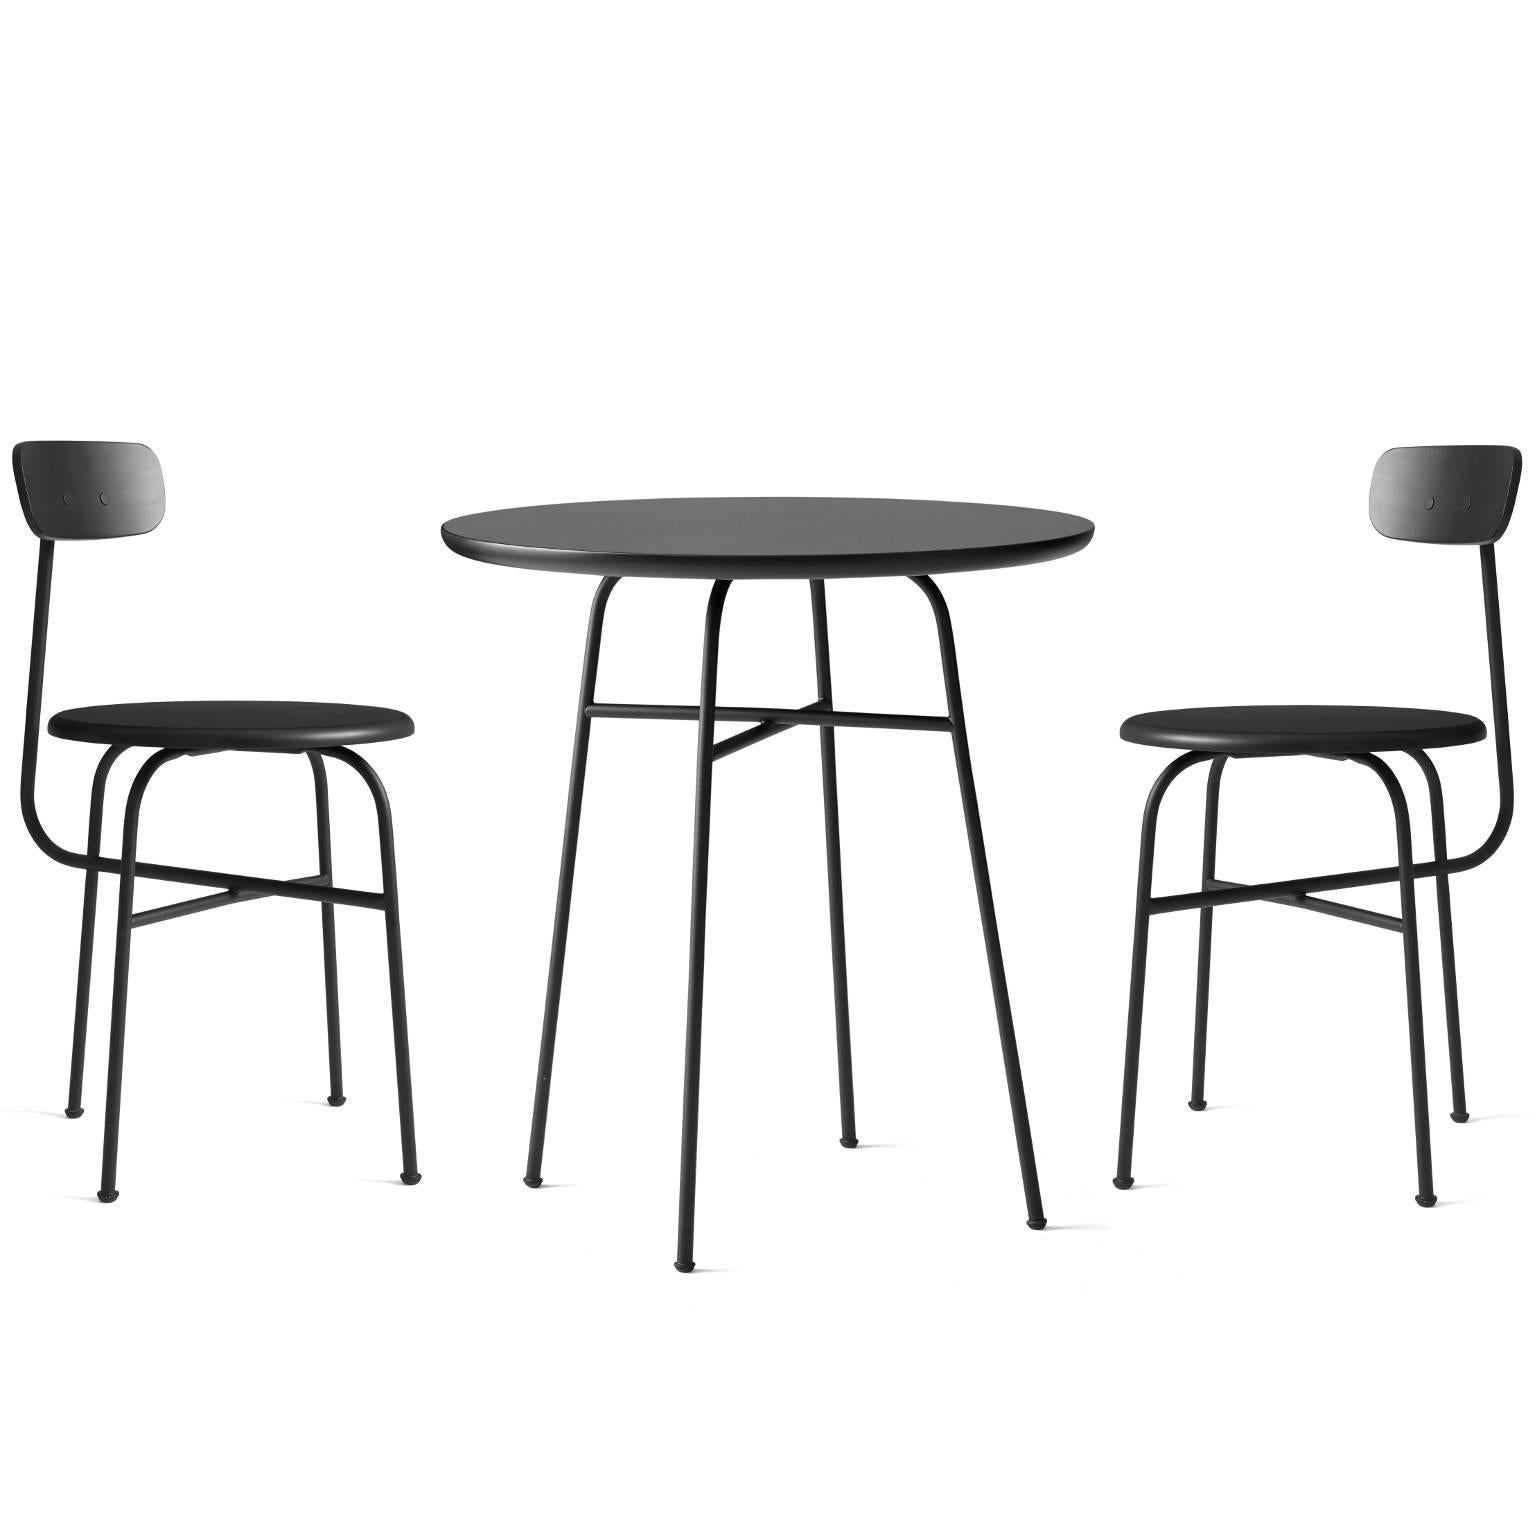 Scandinavian Modern Dining Chair by Afteroom, Black Steel Frame, with Painted Wood Seats For Sale